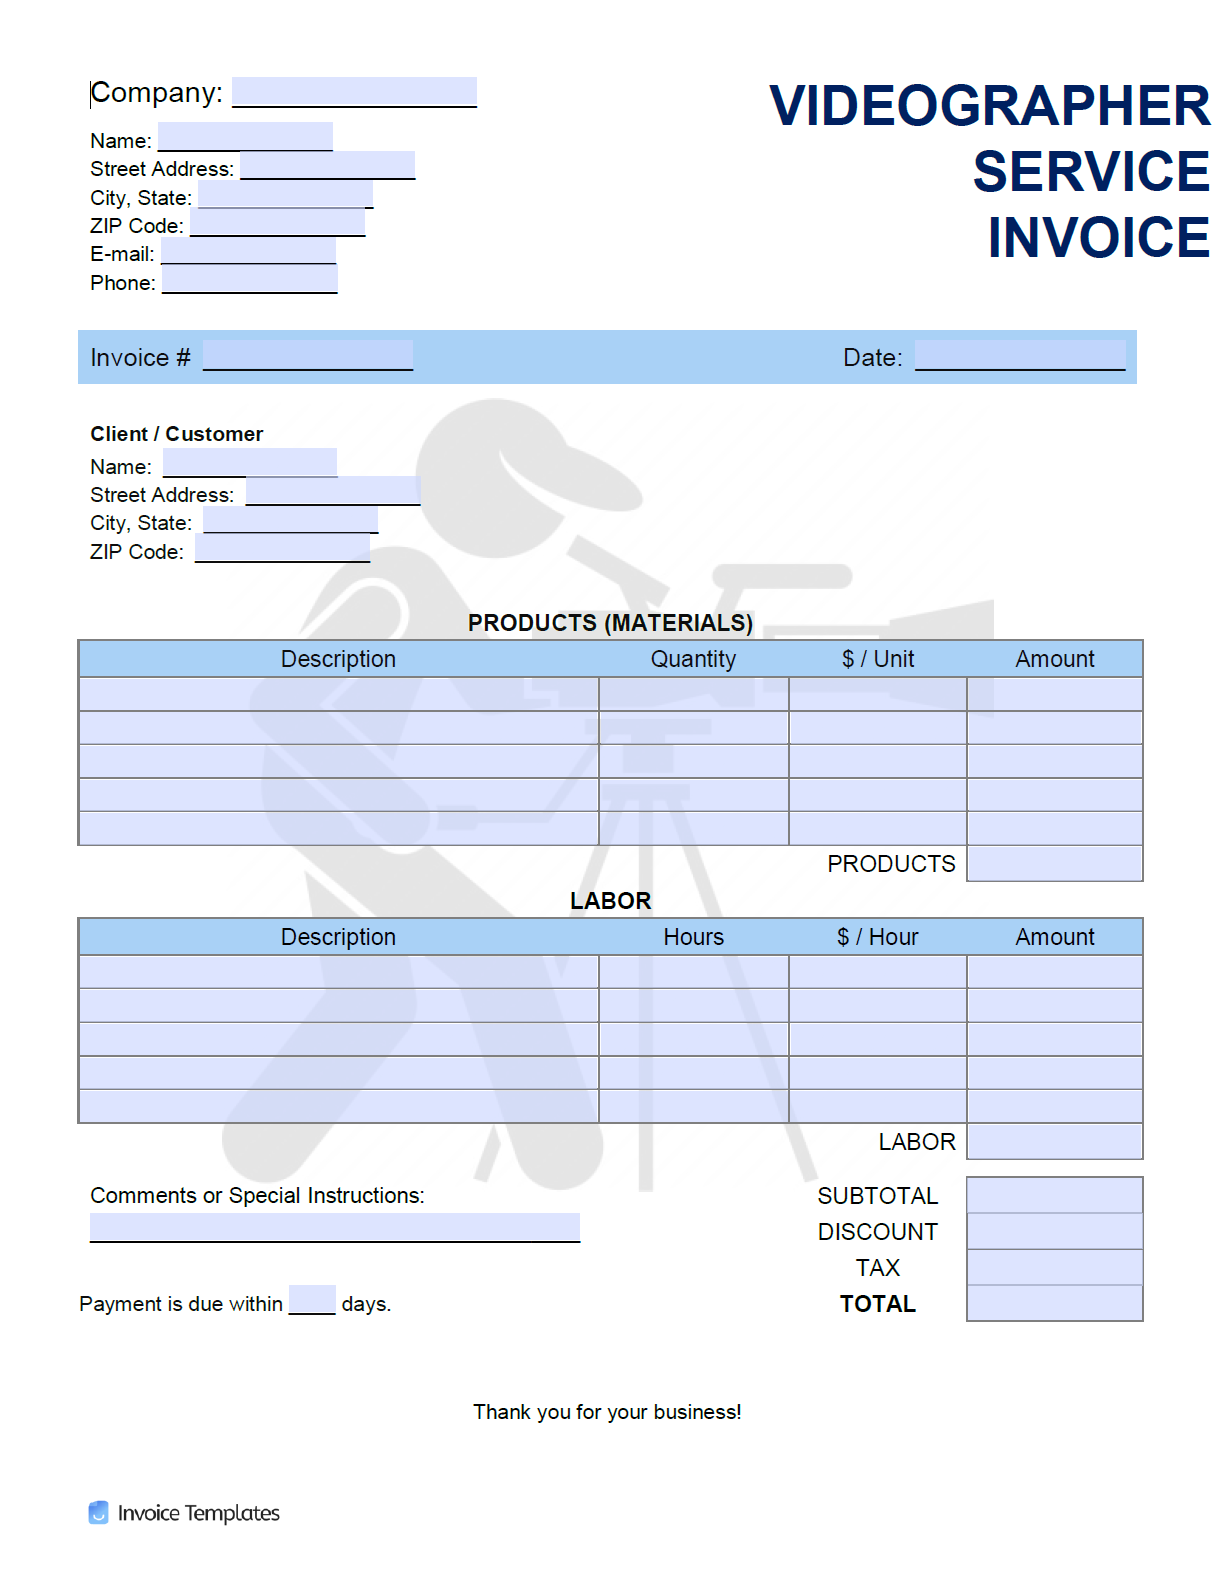 videography-invoice-templates